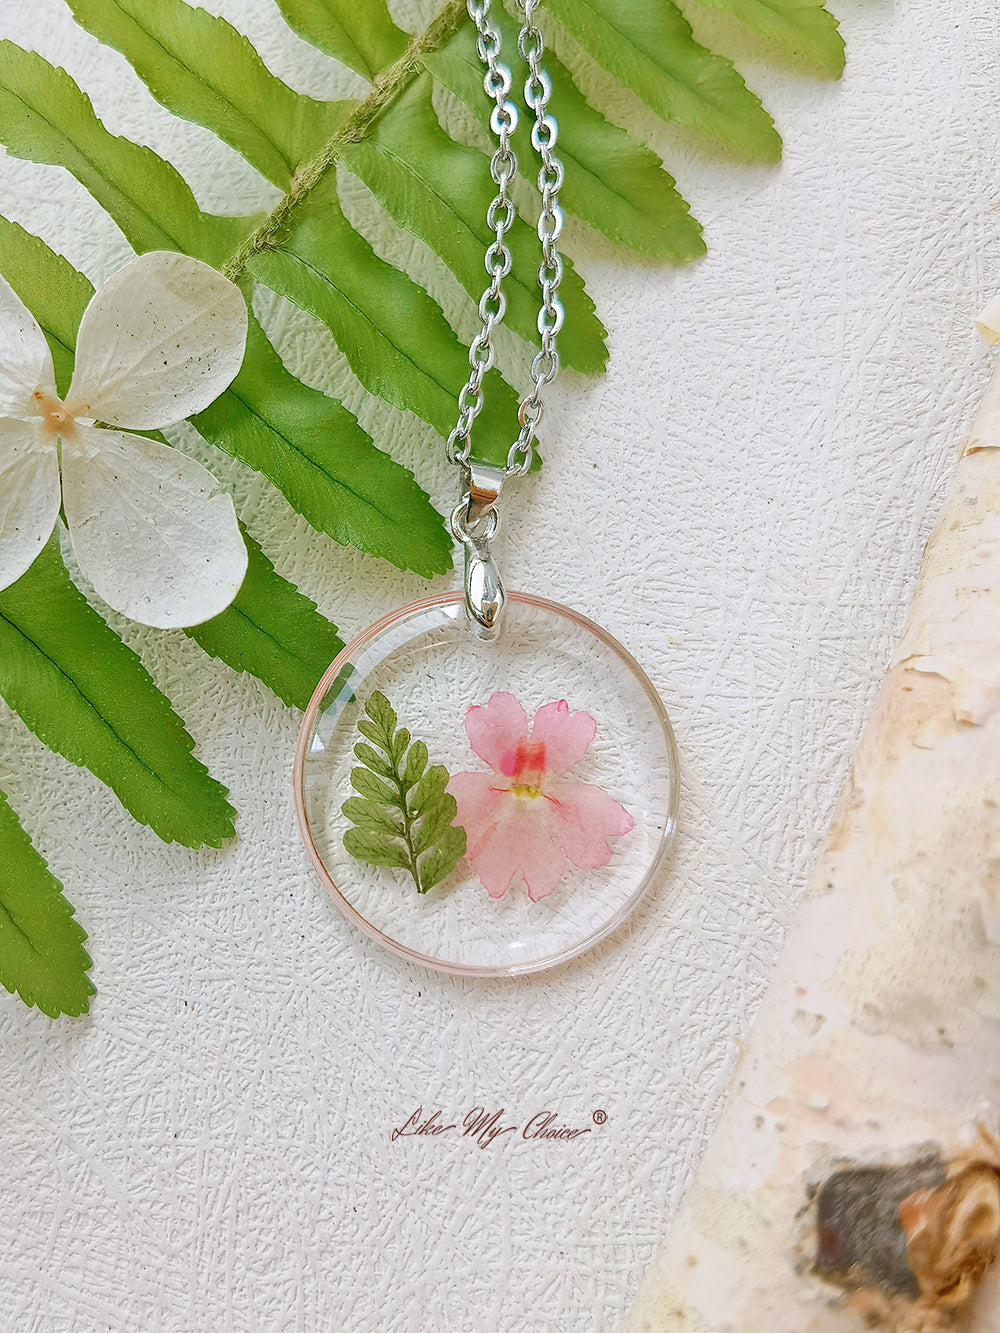 Natural Fern Mallow Resin Pressed Flower Botanical Pendant Necklace